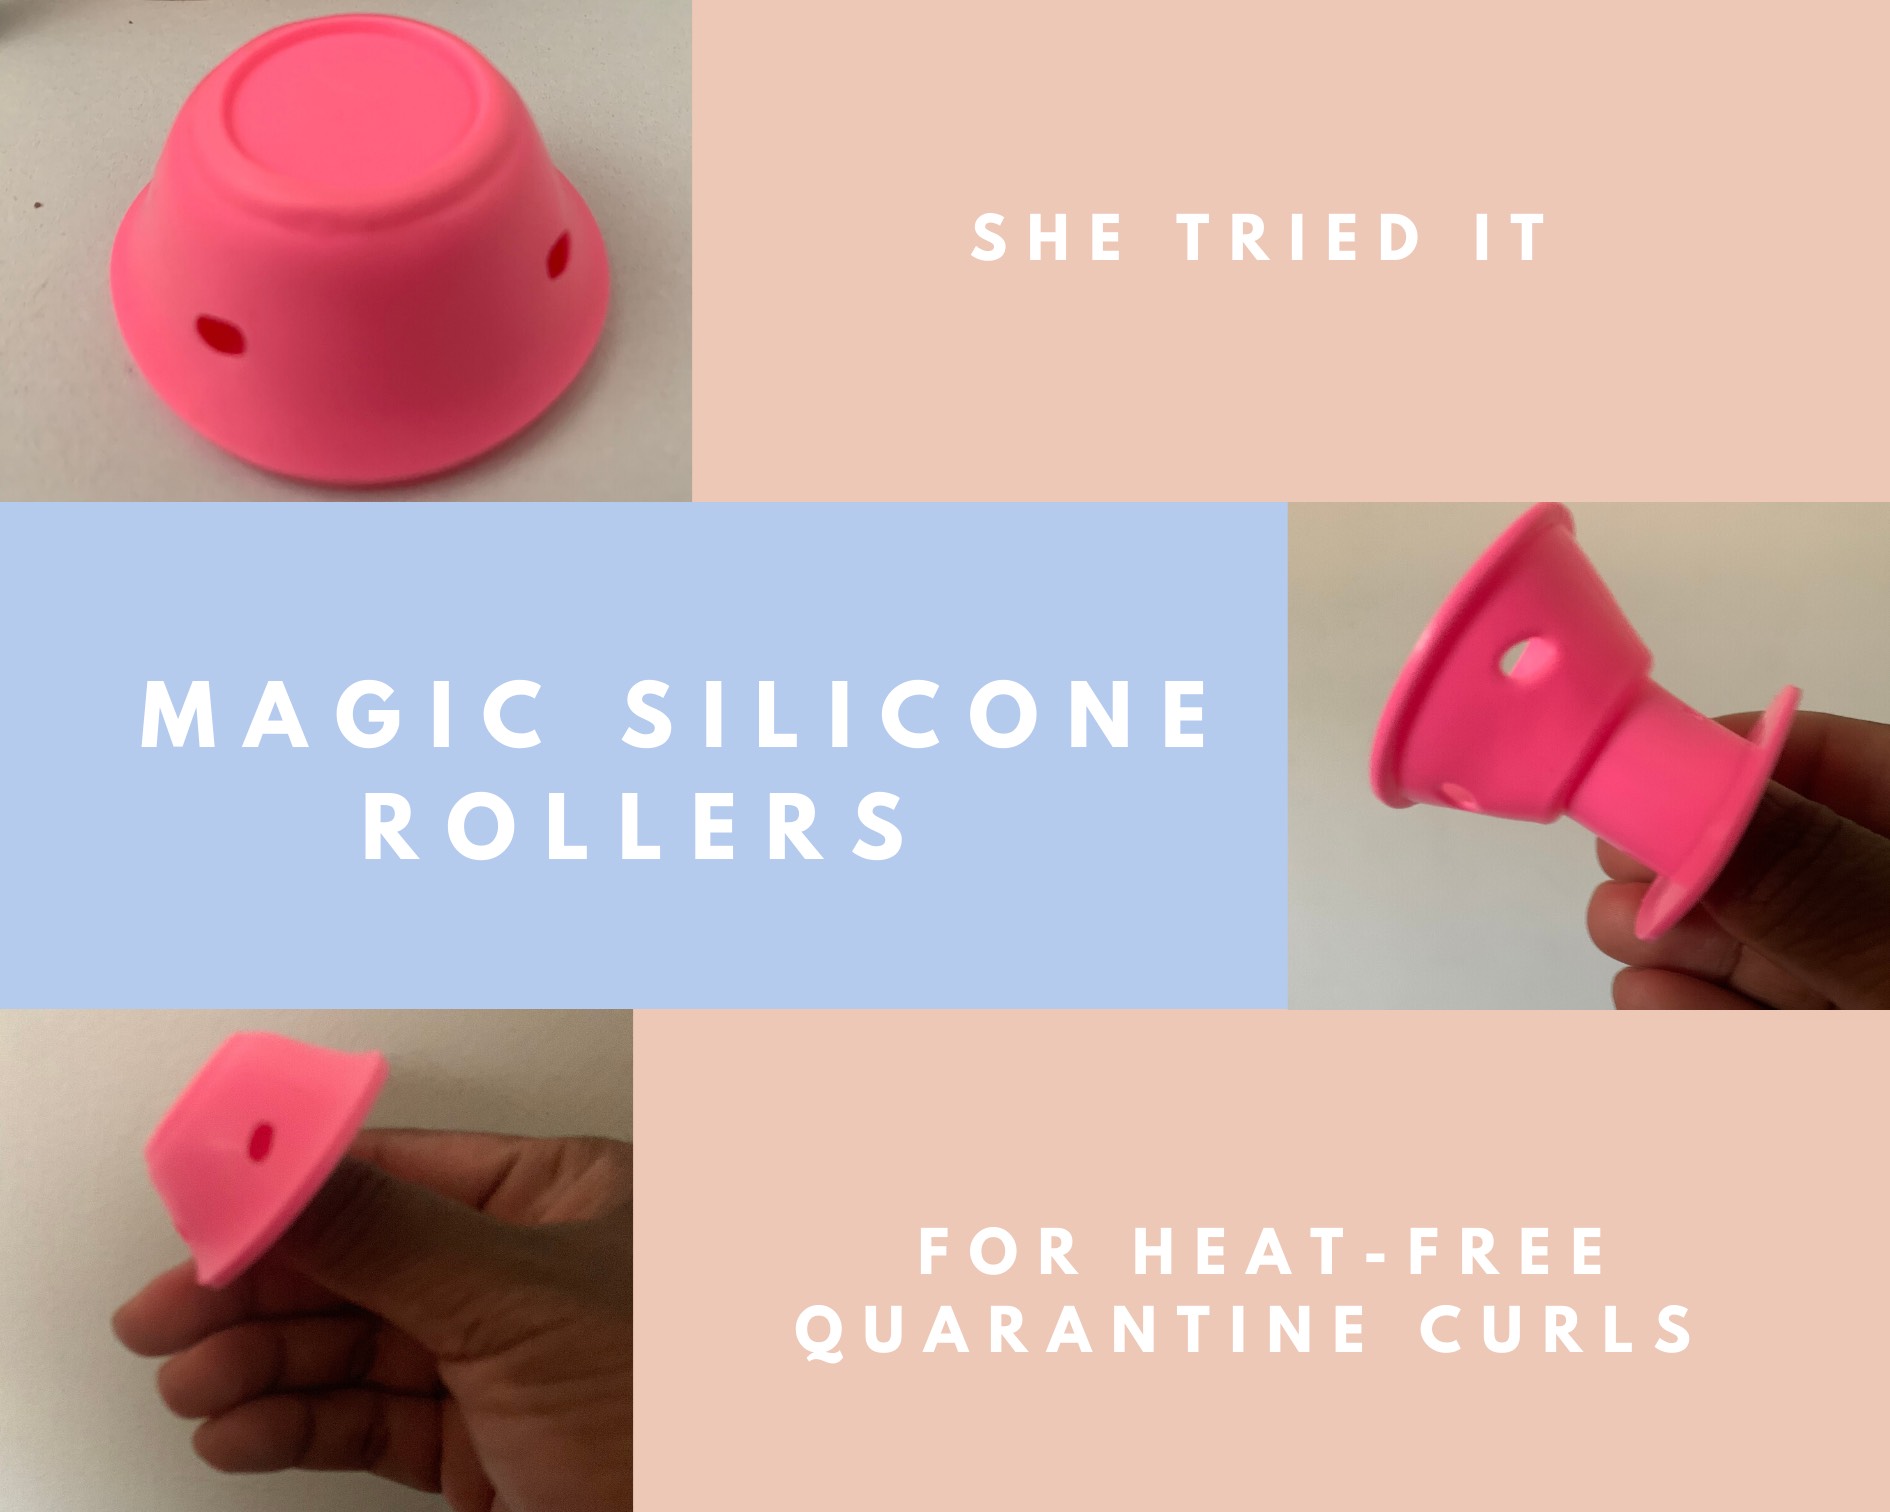 Magic Silicone Rollers